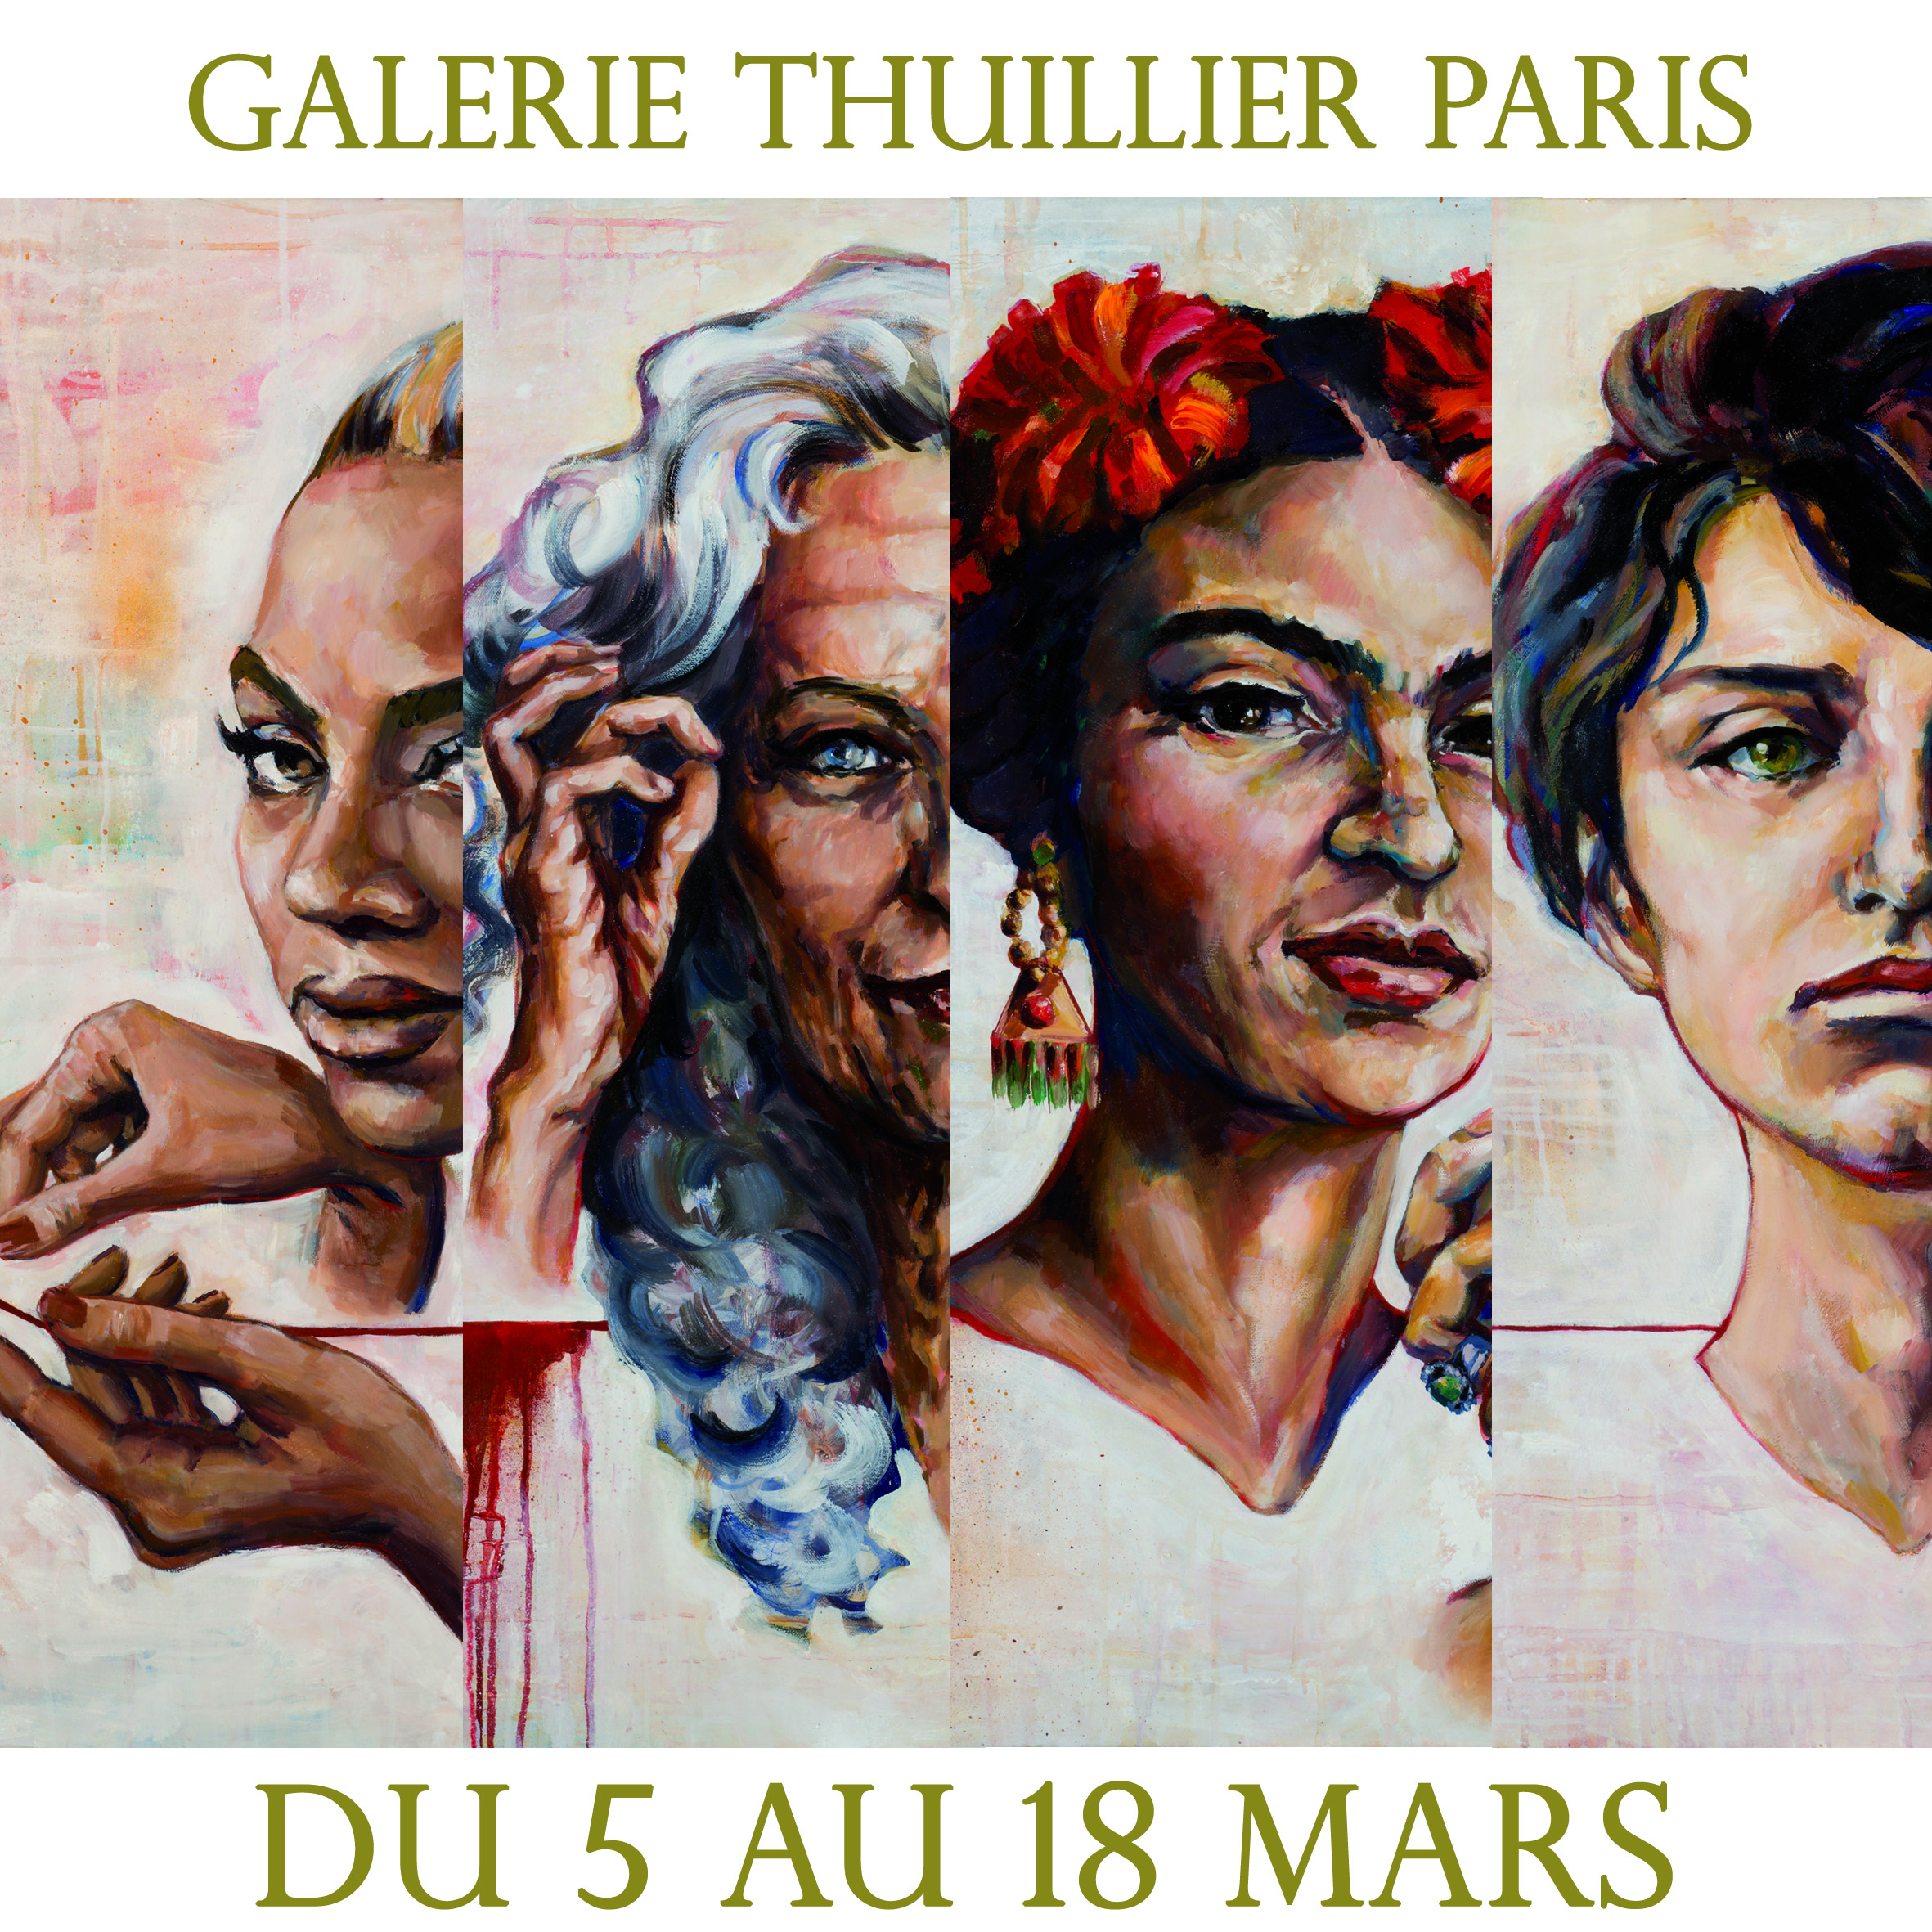 Collective exhibition at Galerie Thuillier